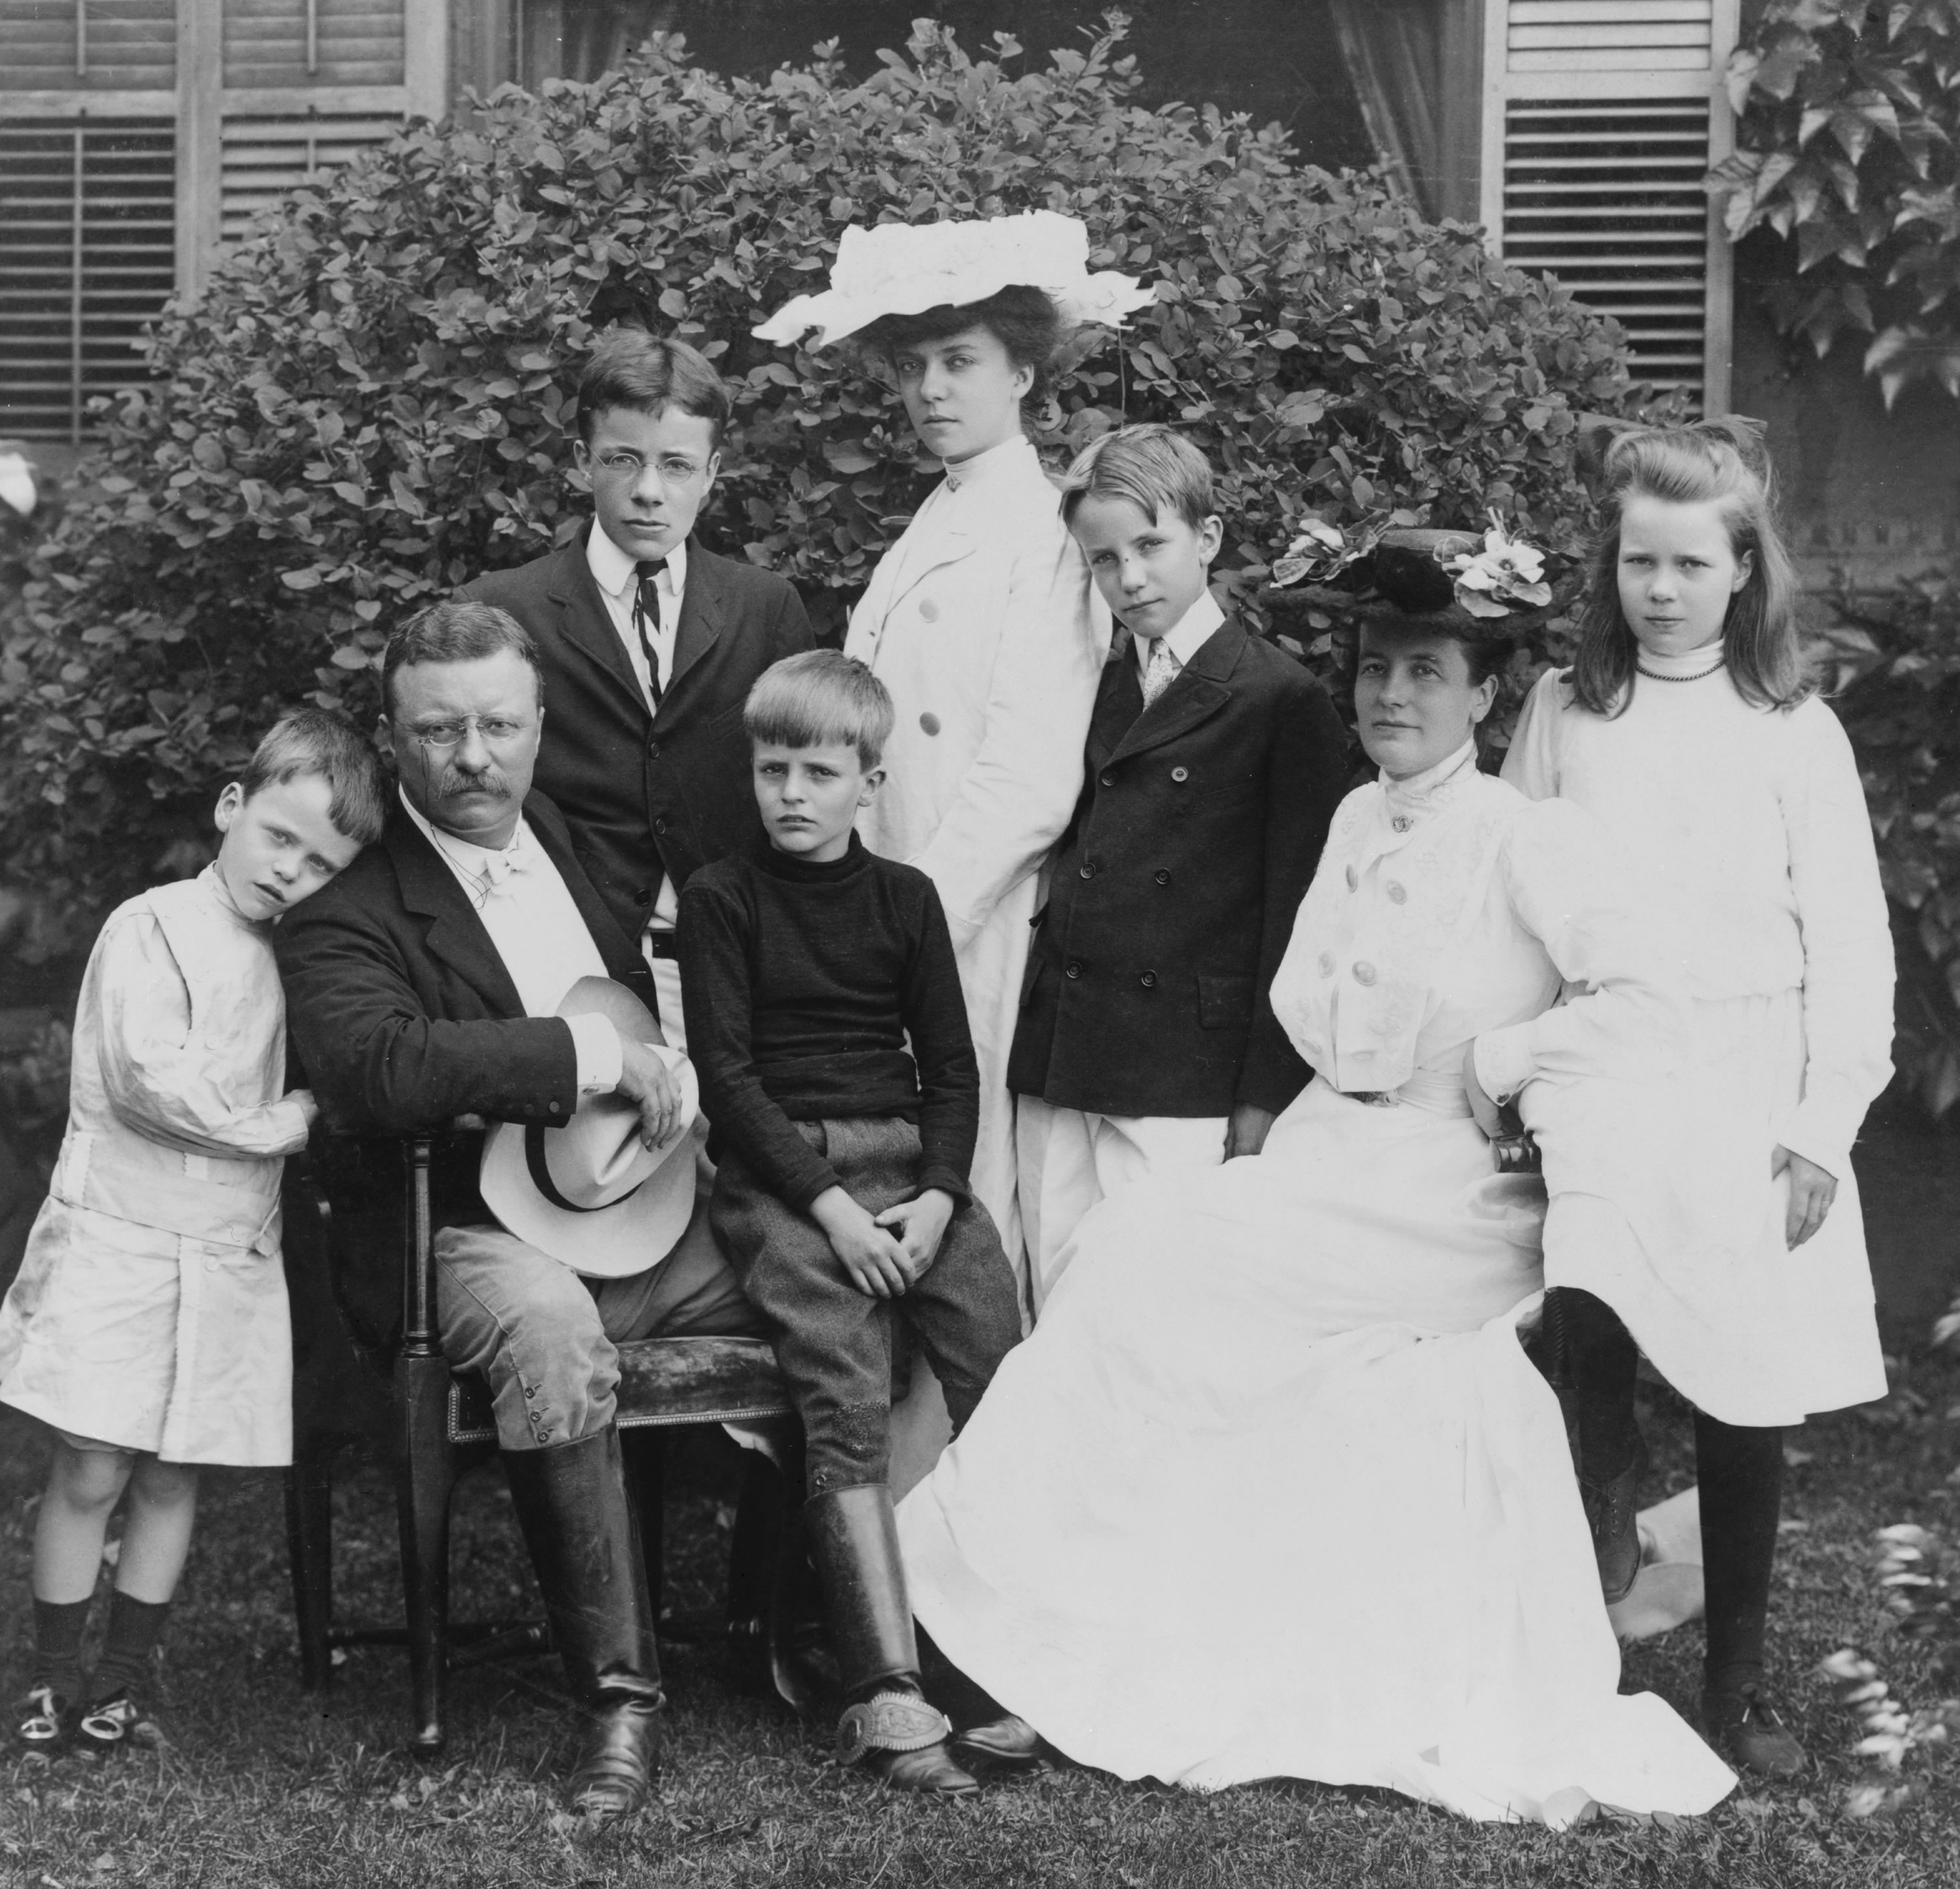 Pres. and Mrs. Theodore Roosevelt seated on lawn, surrounded by their family; 1903. From left to right: Quentin, Theodore Sr., Theodore Jr., Archie, Alice, Kermit, Edith, and Ethel. (public domain through US National Library of Congress= 